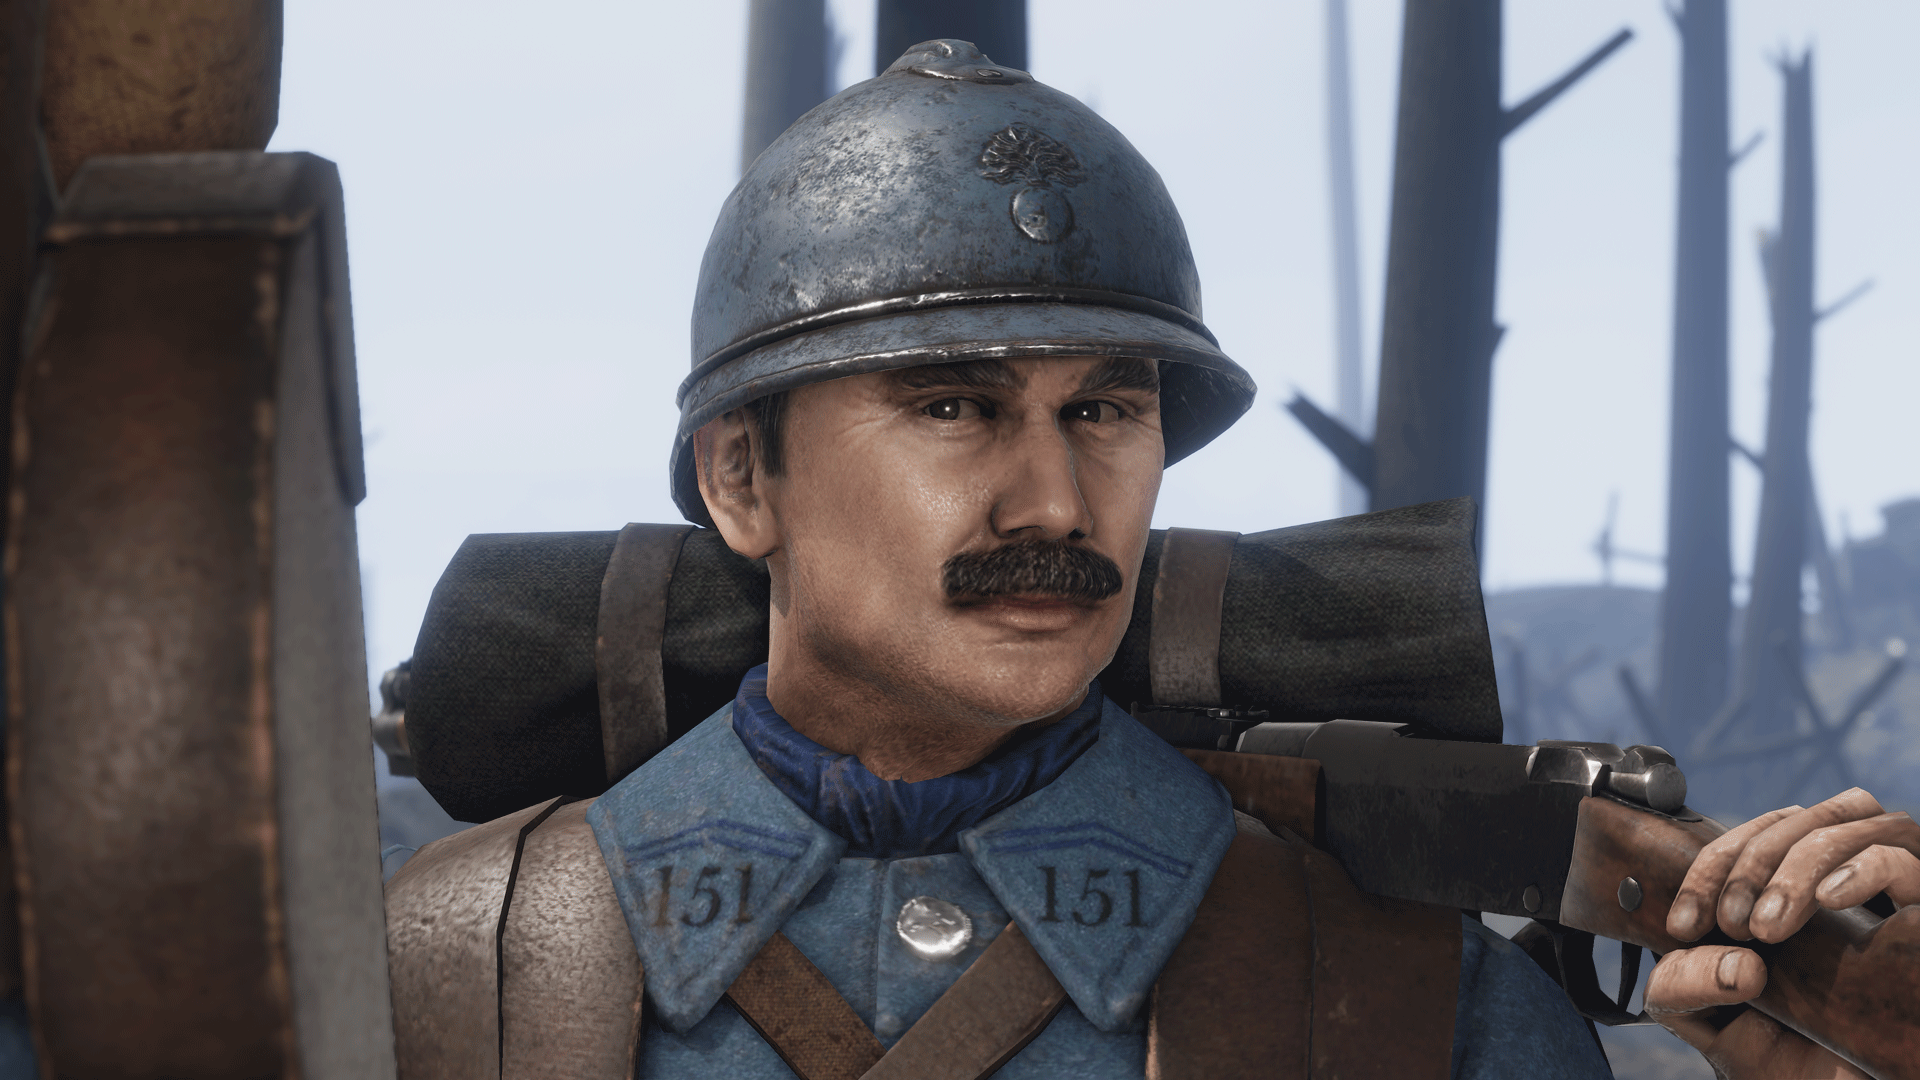 FrenchSoldier